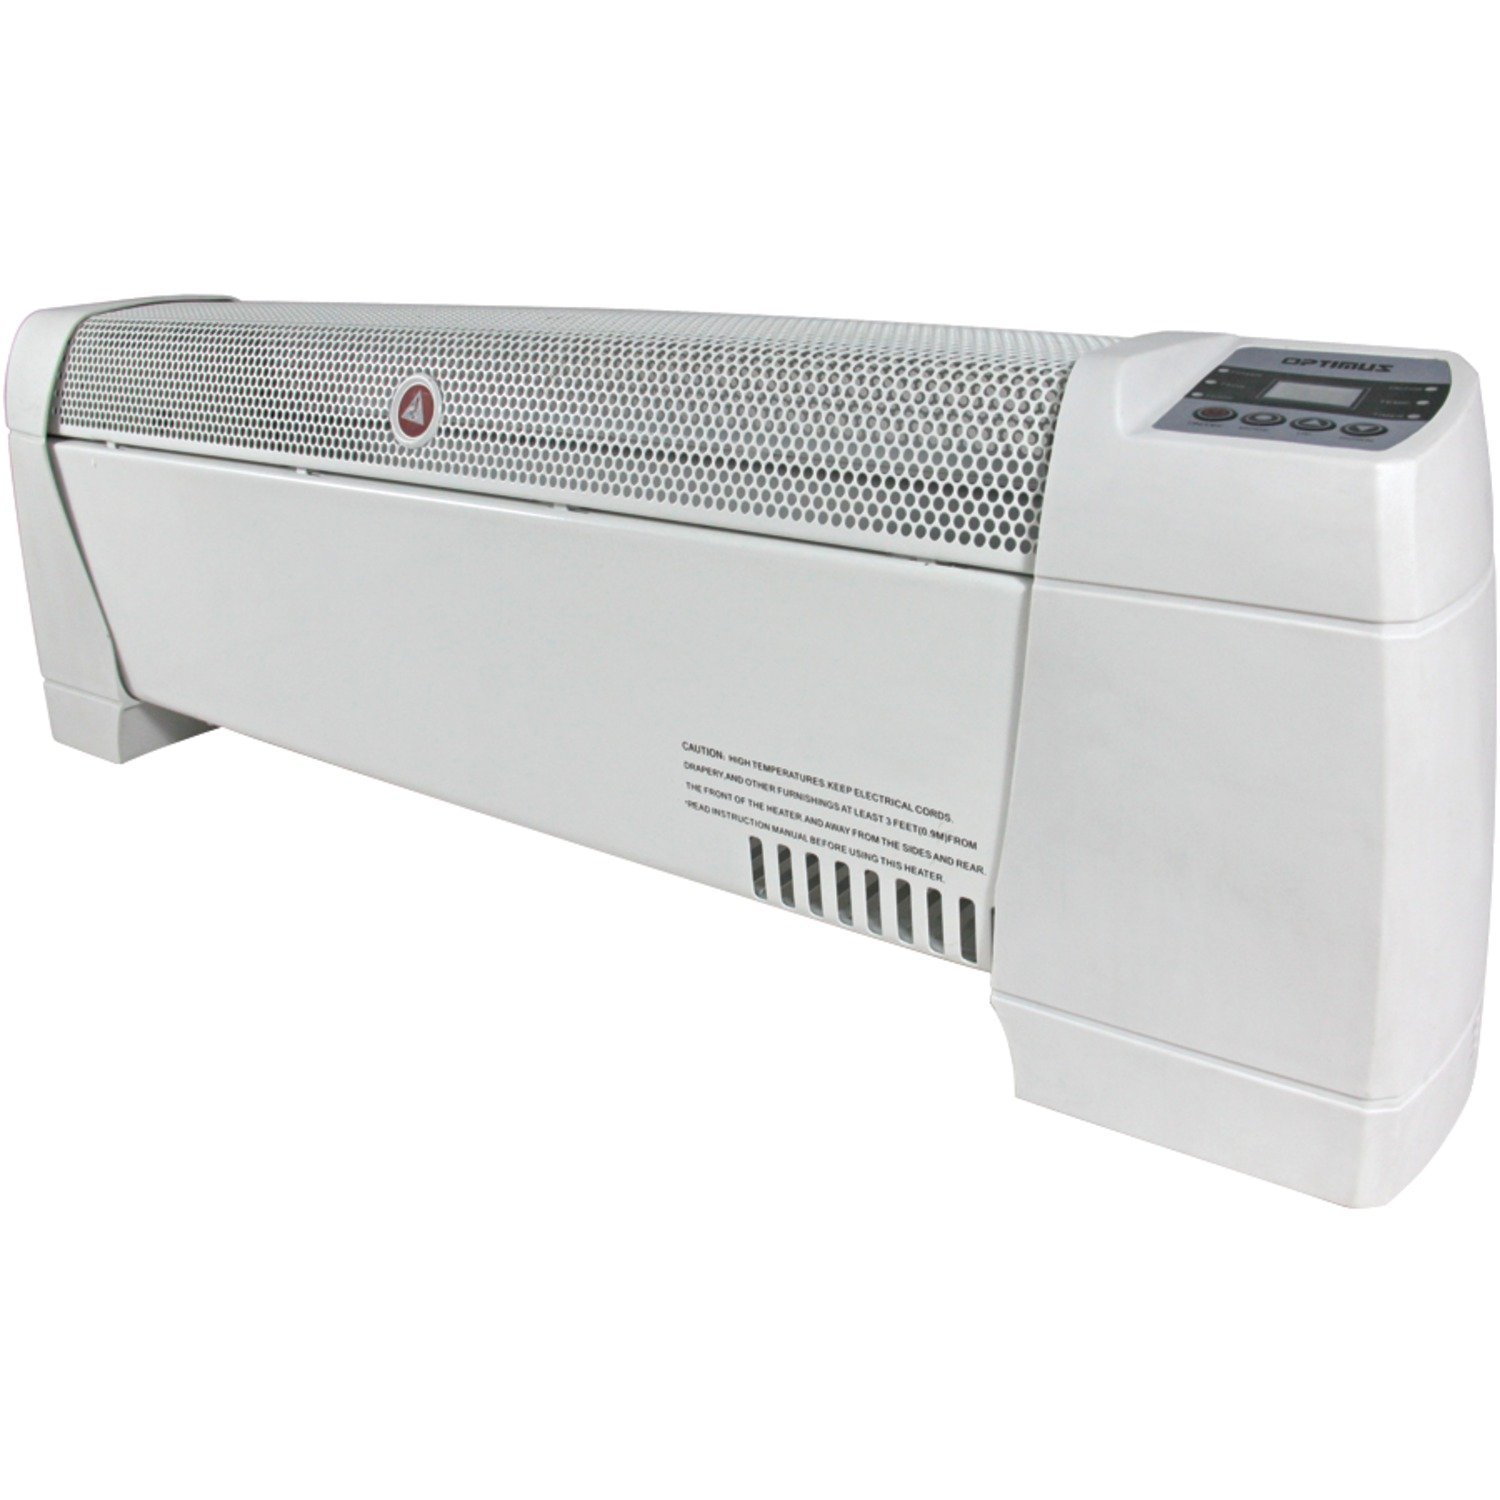 built-in convection heater